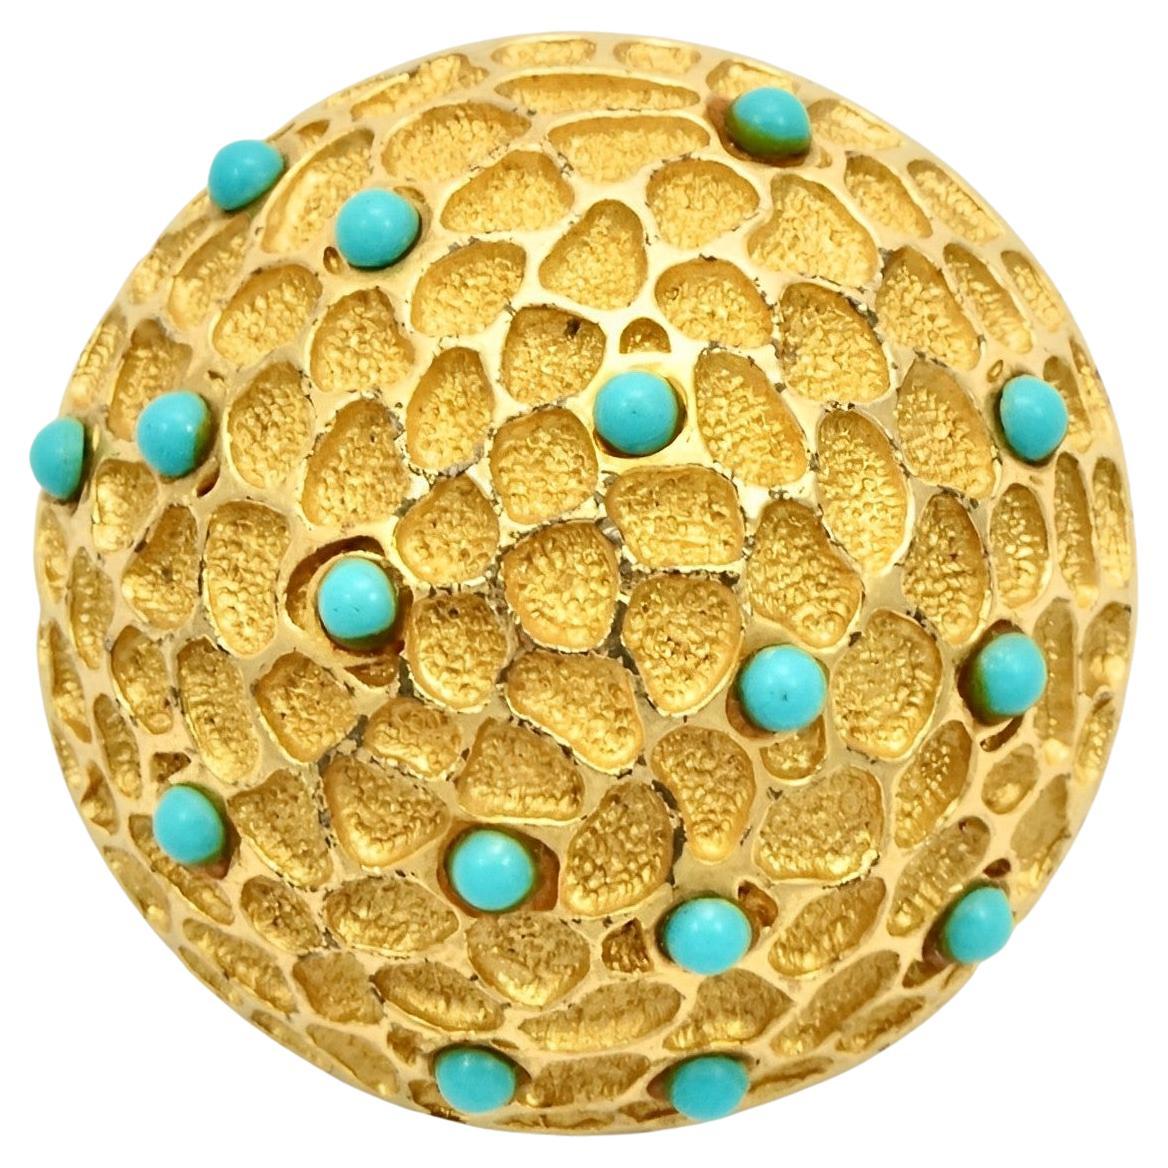 Textured Gold Plated Faux Turquoise Glass Dome Brooch circa 1970s For Sale